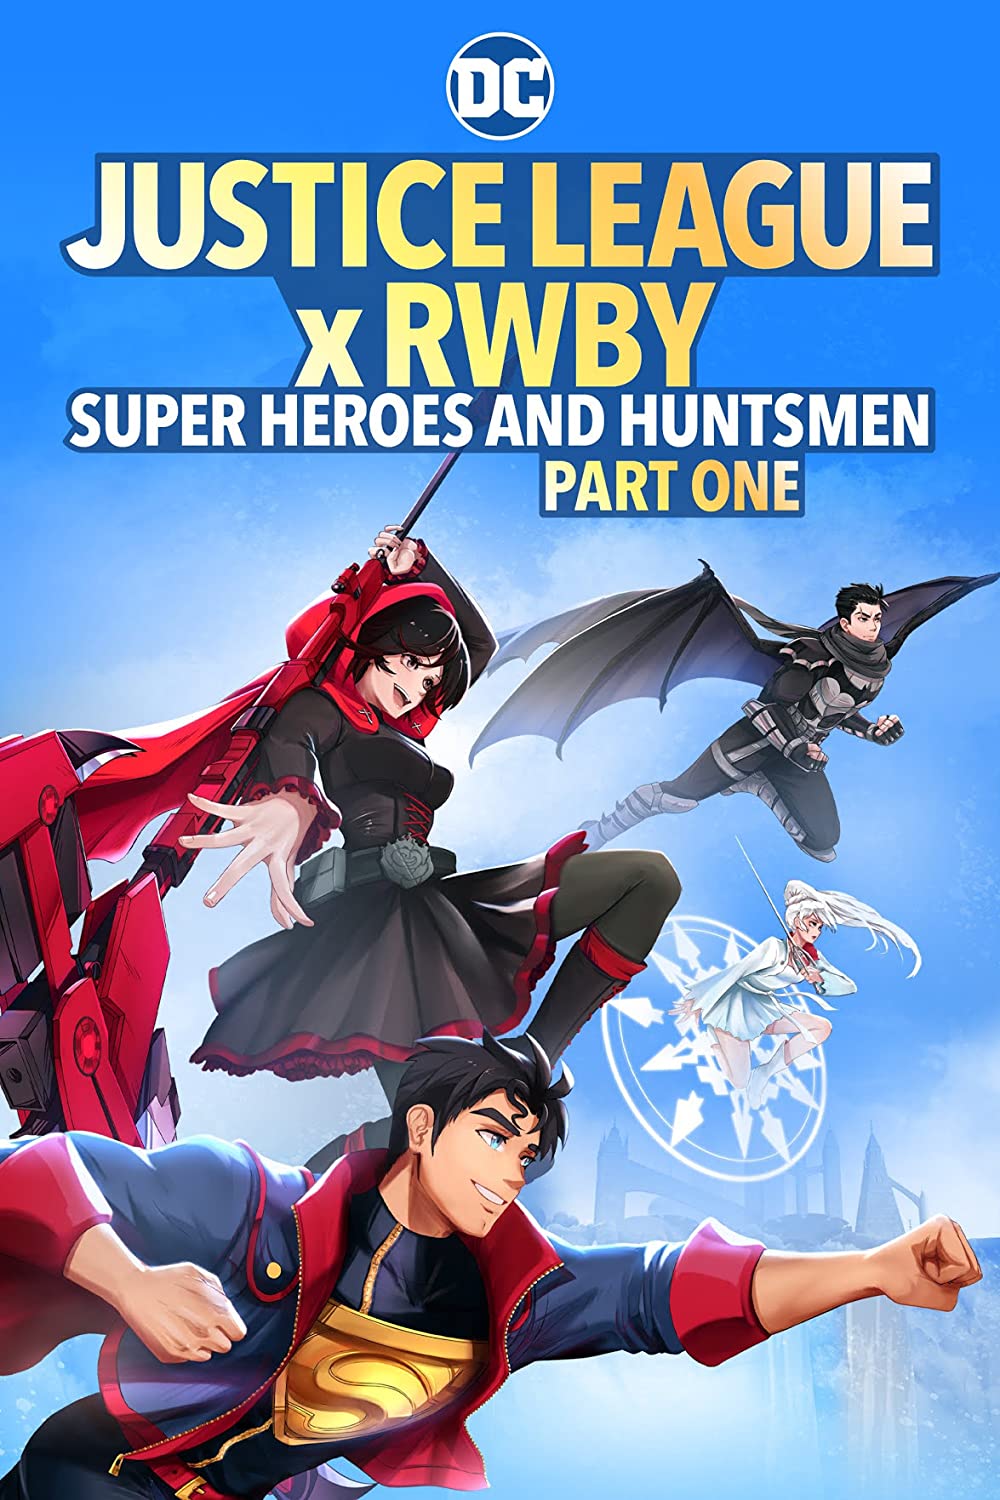 Justice League x RWBY: Super Heroes and Huntsmen, Part One HD Moviesanywhere